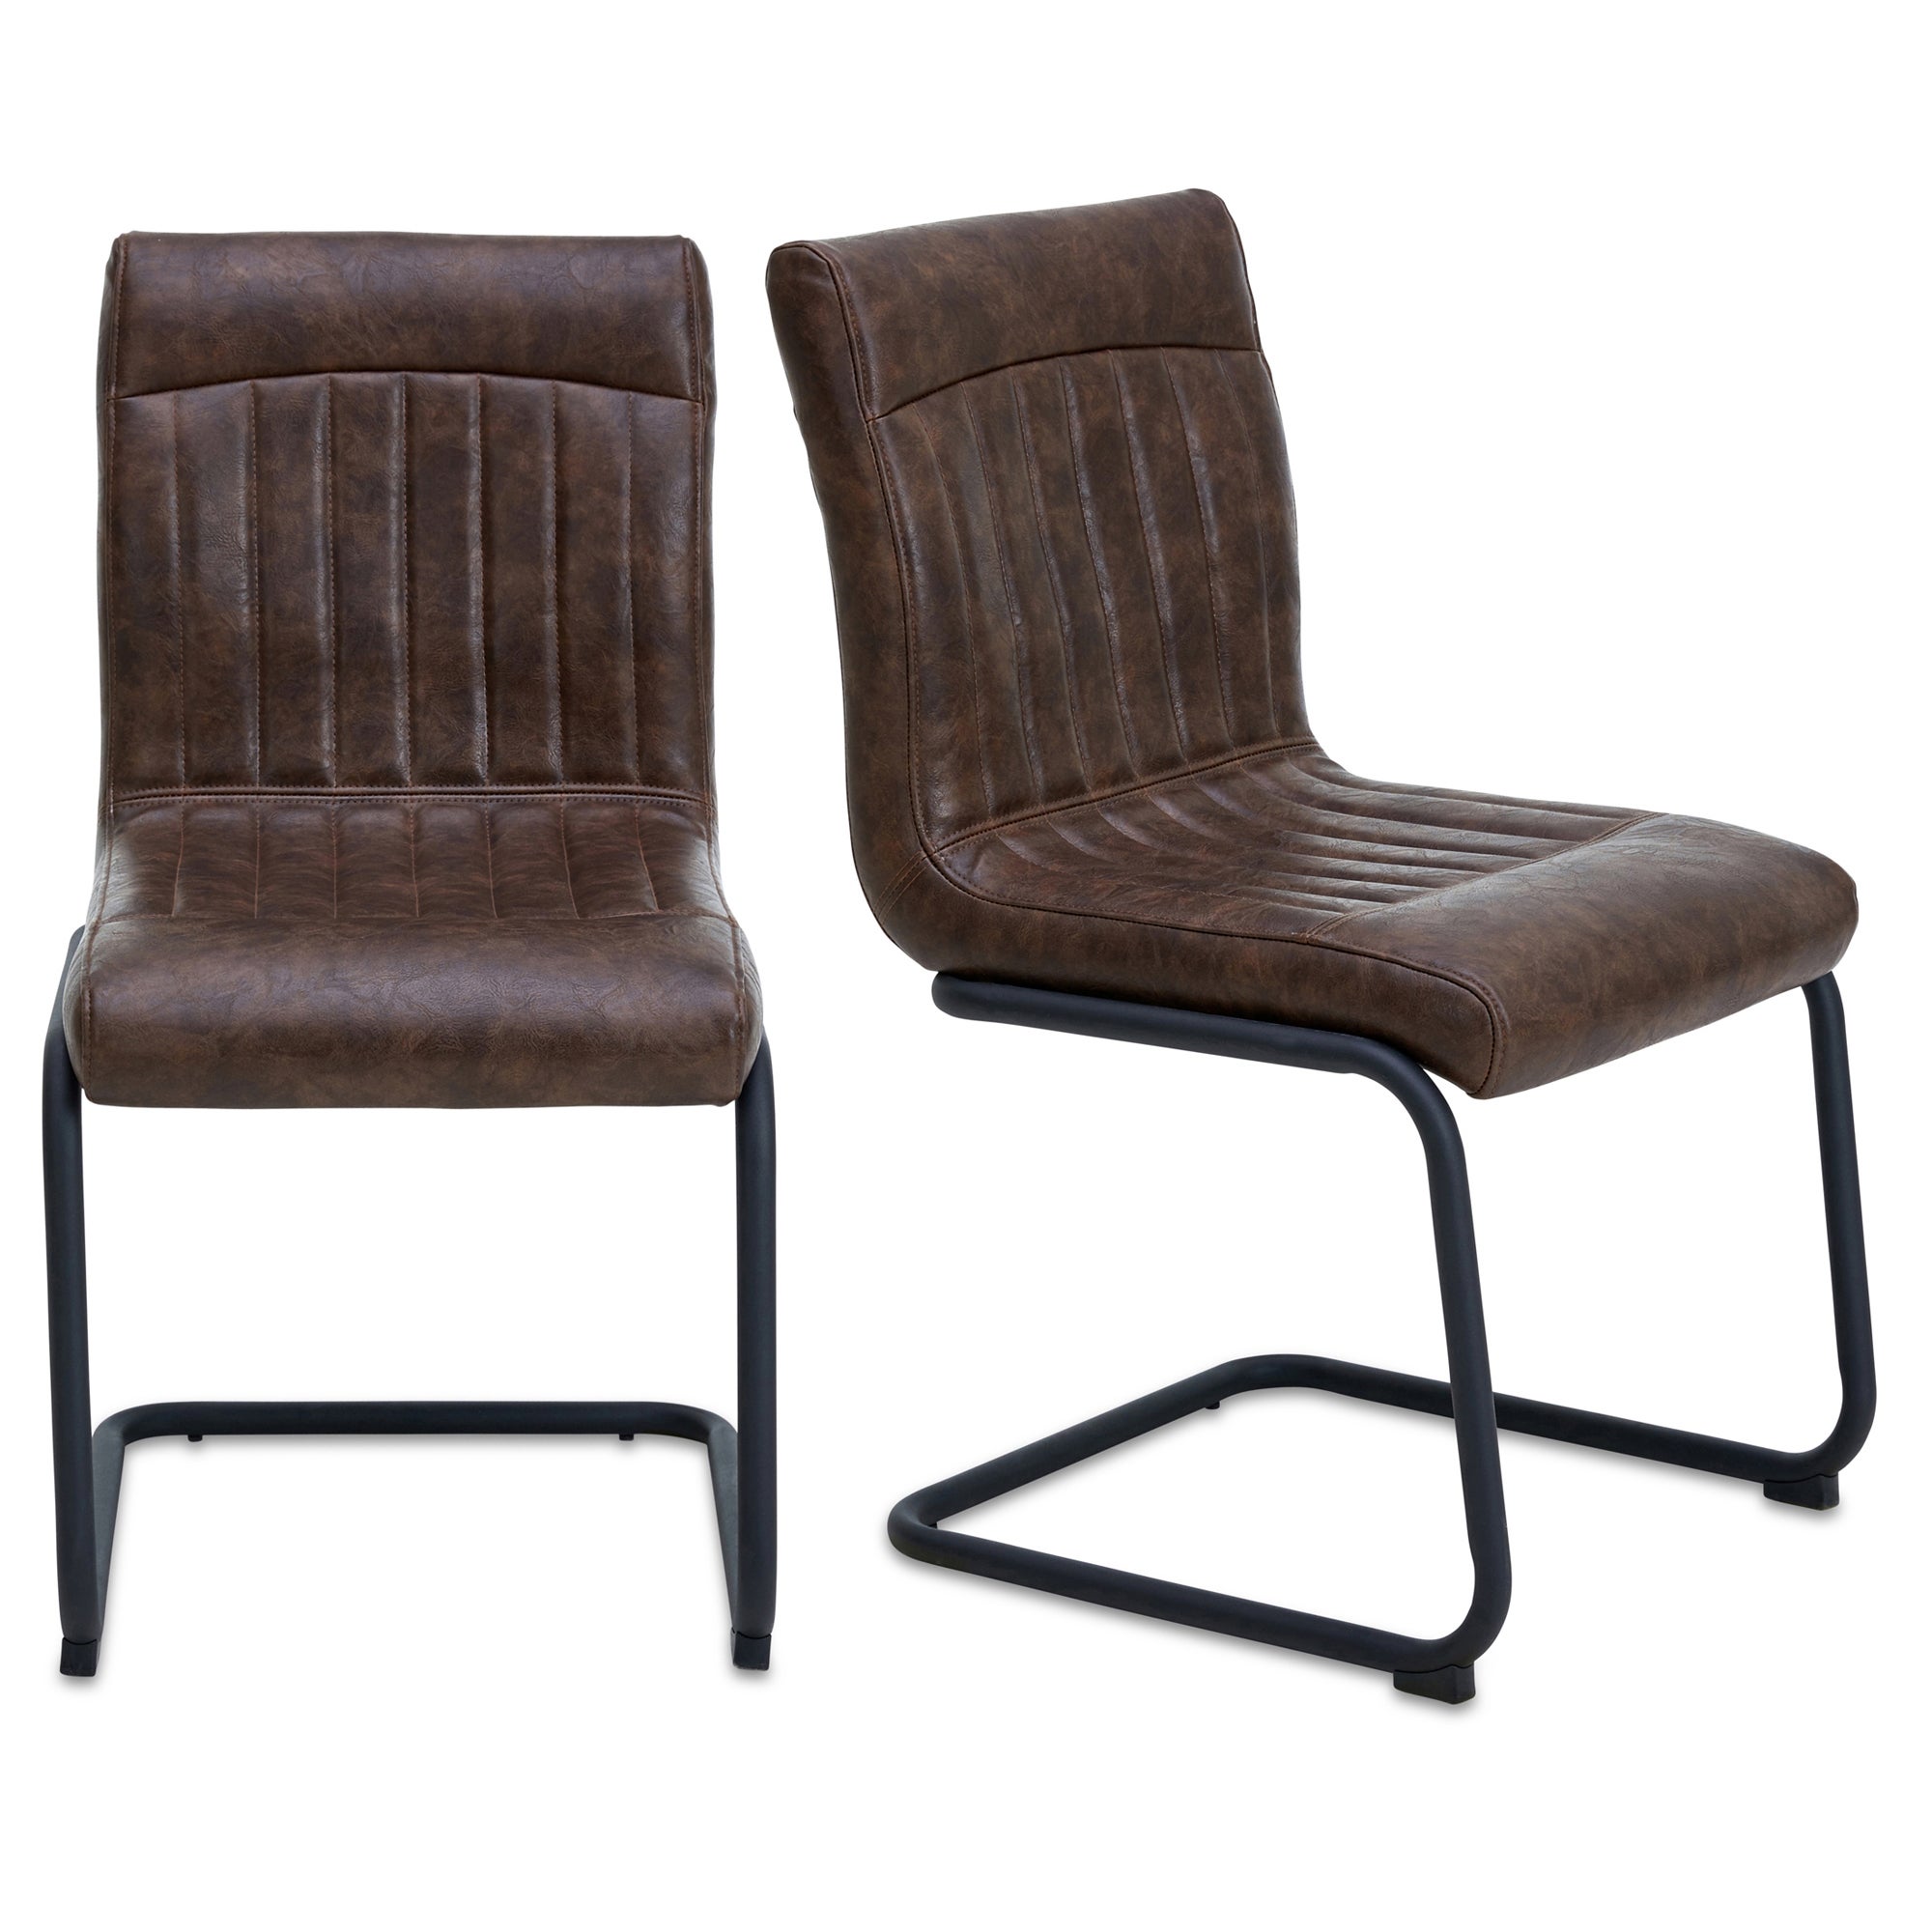 2 Dining Chairs Brown Pu Leather, Felix Walnut Dining Chair